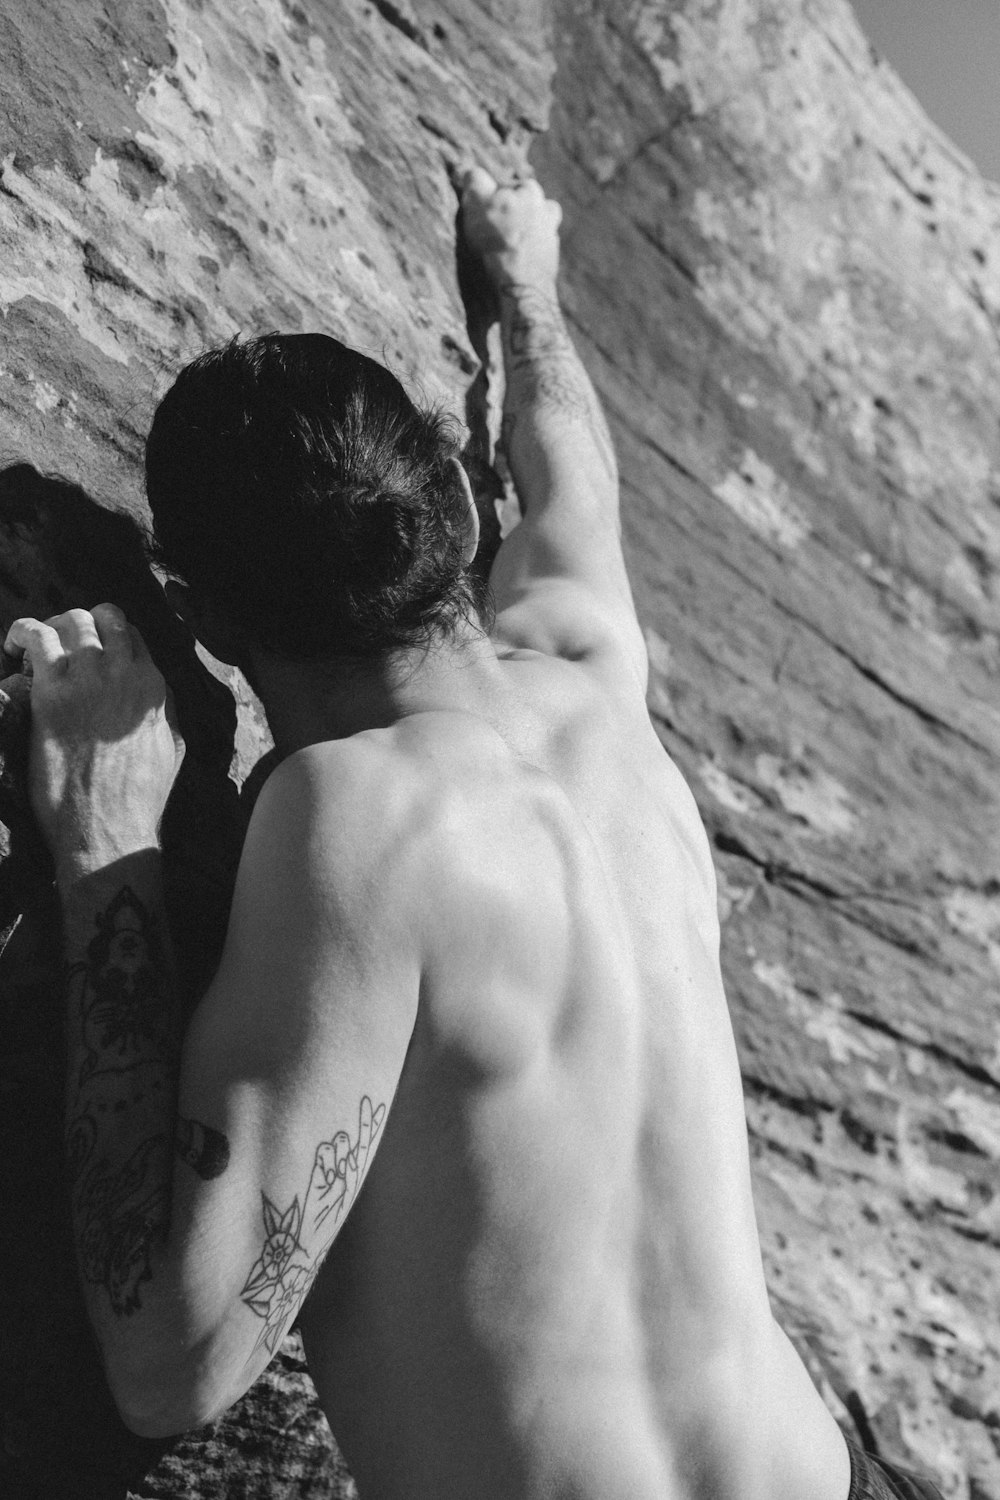 grayscale photo of topless man with tattoo on his back